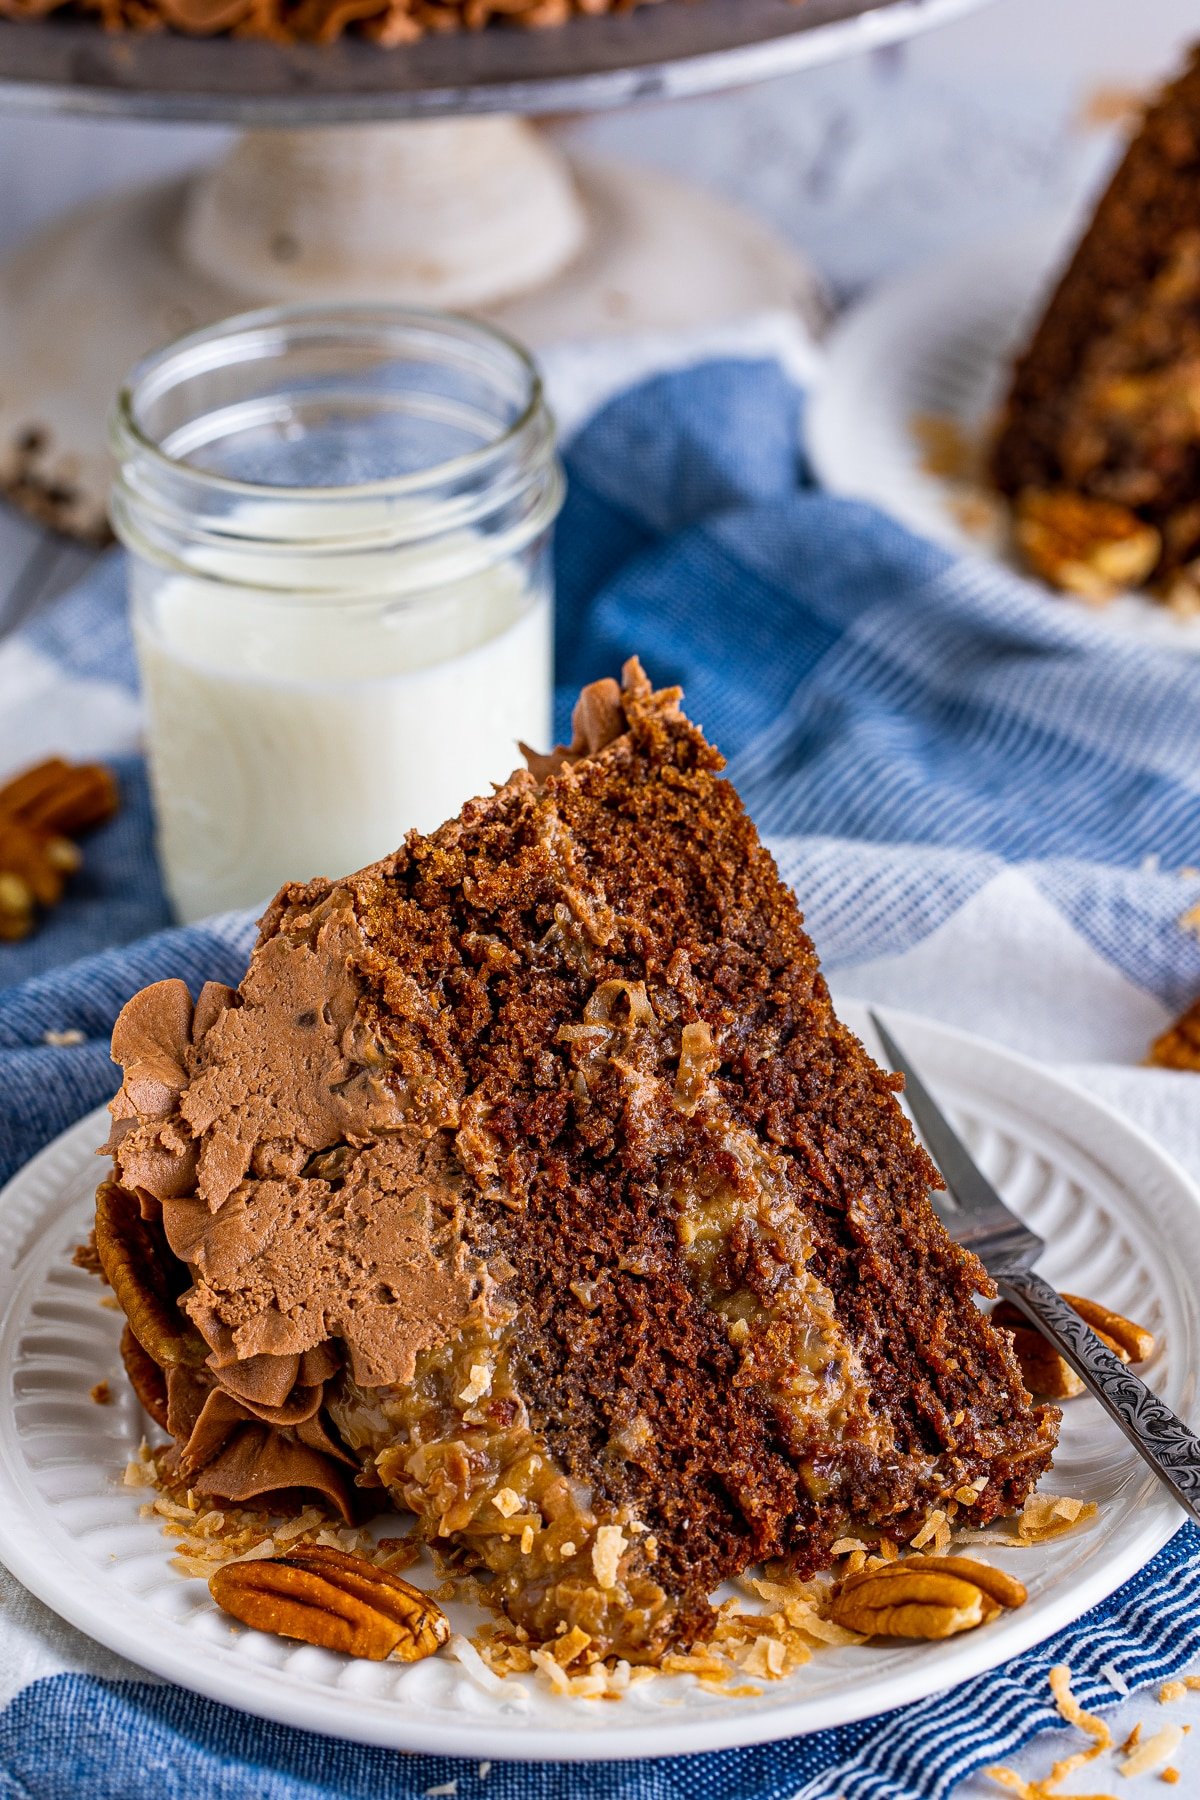 Close up of slice of the German Chocolate Cake Recipe showing the filling and topping.